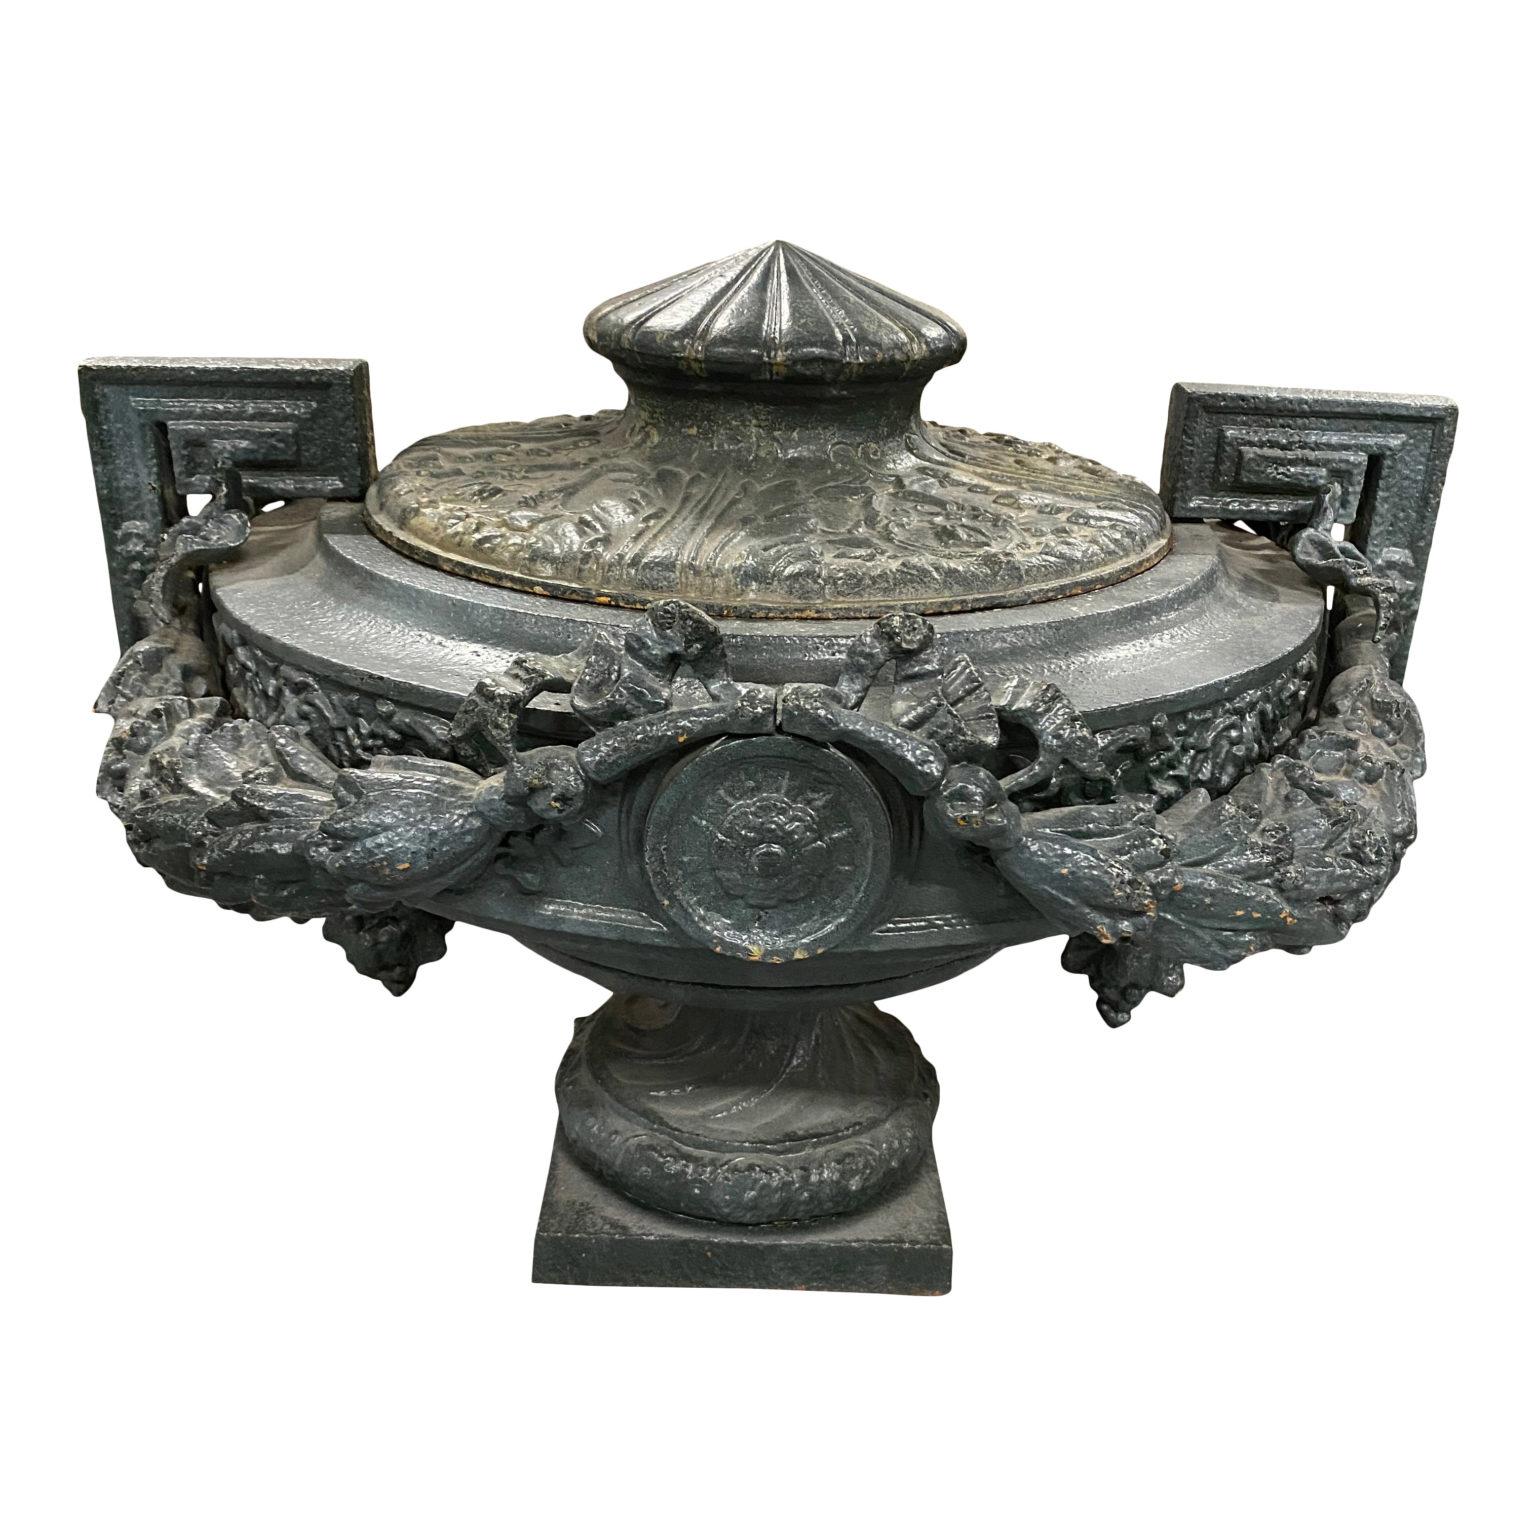 Lidded 19th Century Cast Iron Green Urn with Top In Good Condition For Sale In Sag Harbor, NY